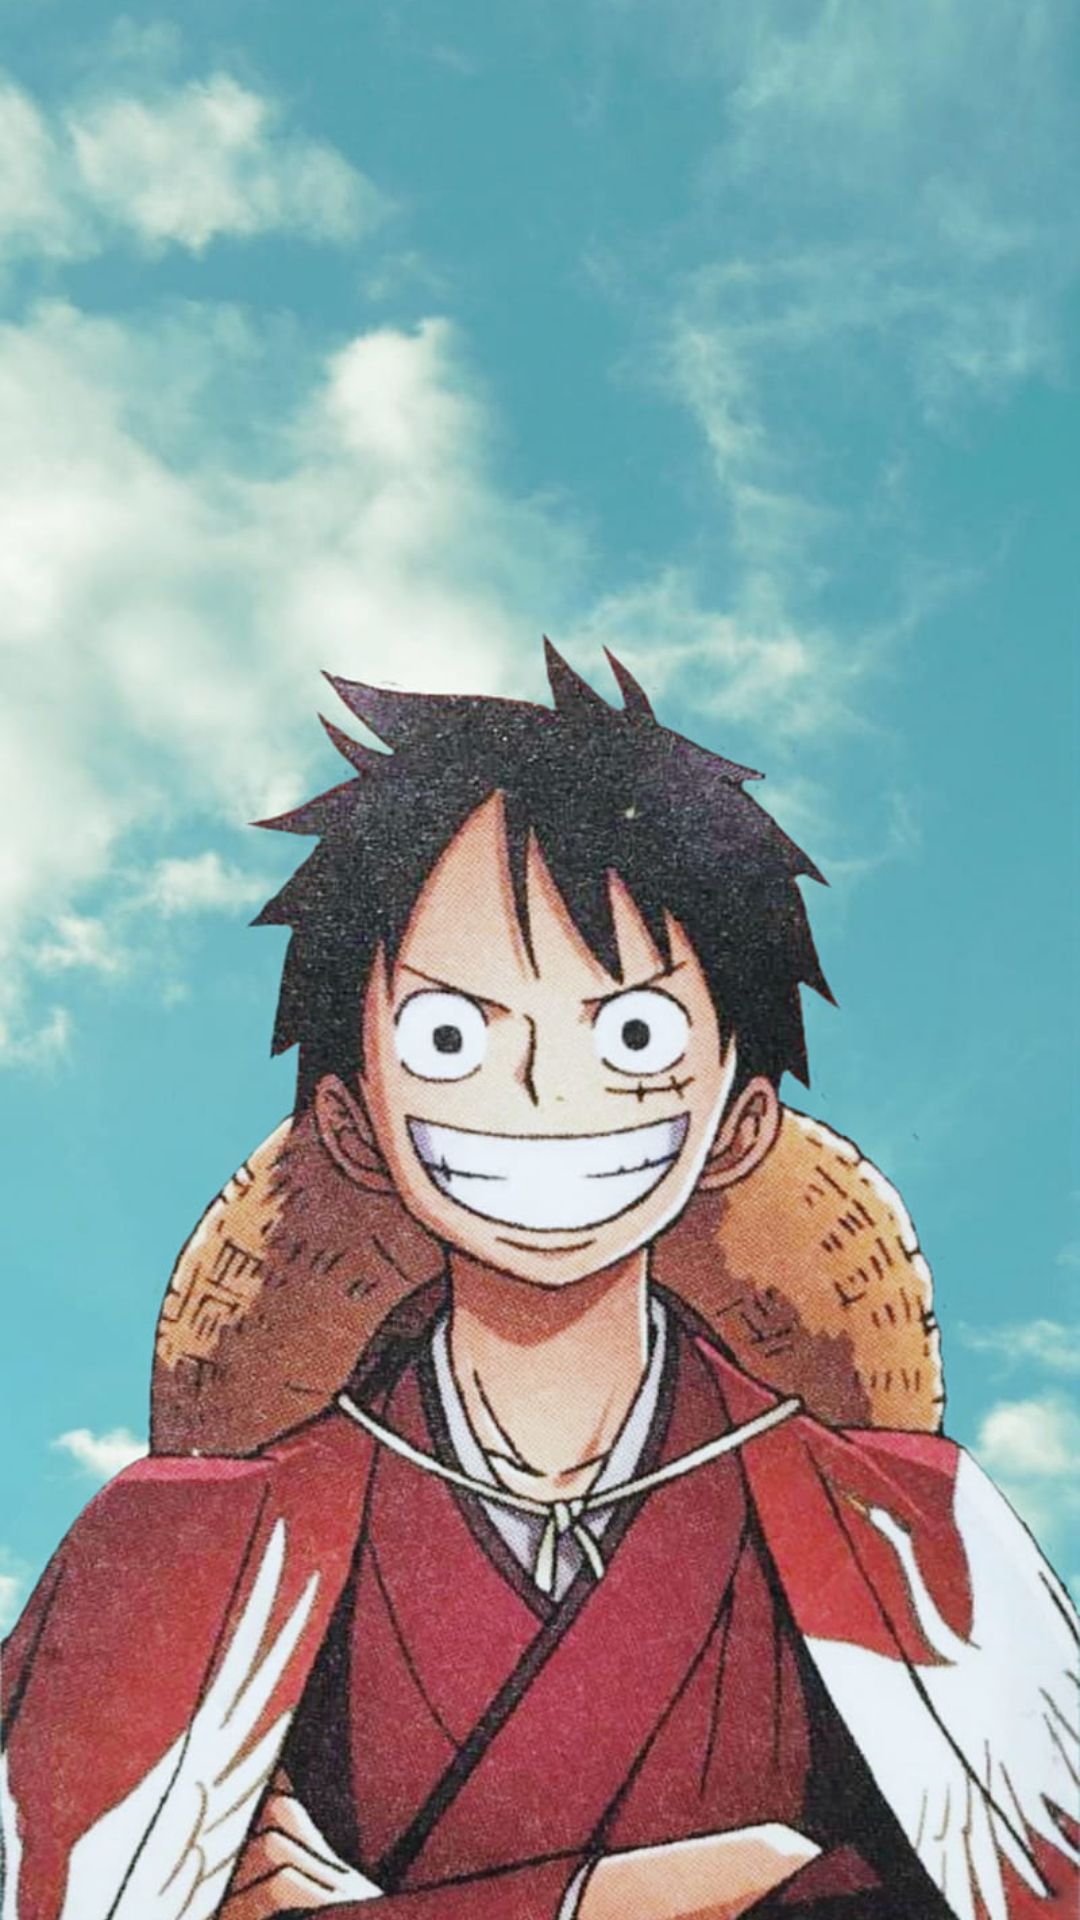 Monkey D. Luffy, one of the main characters of the One Piece series - One Piece